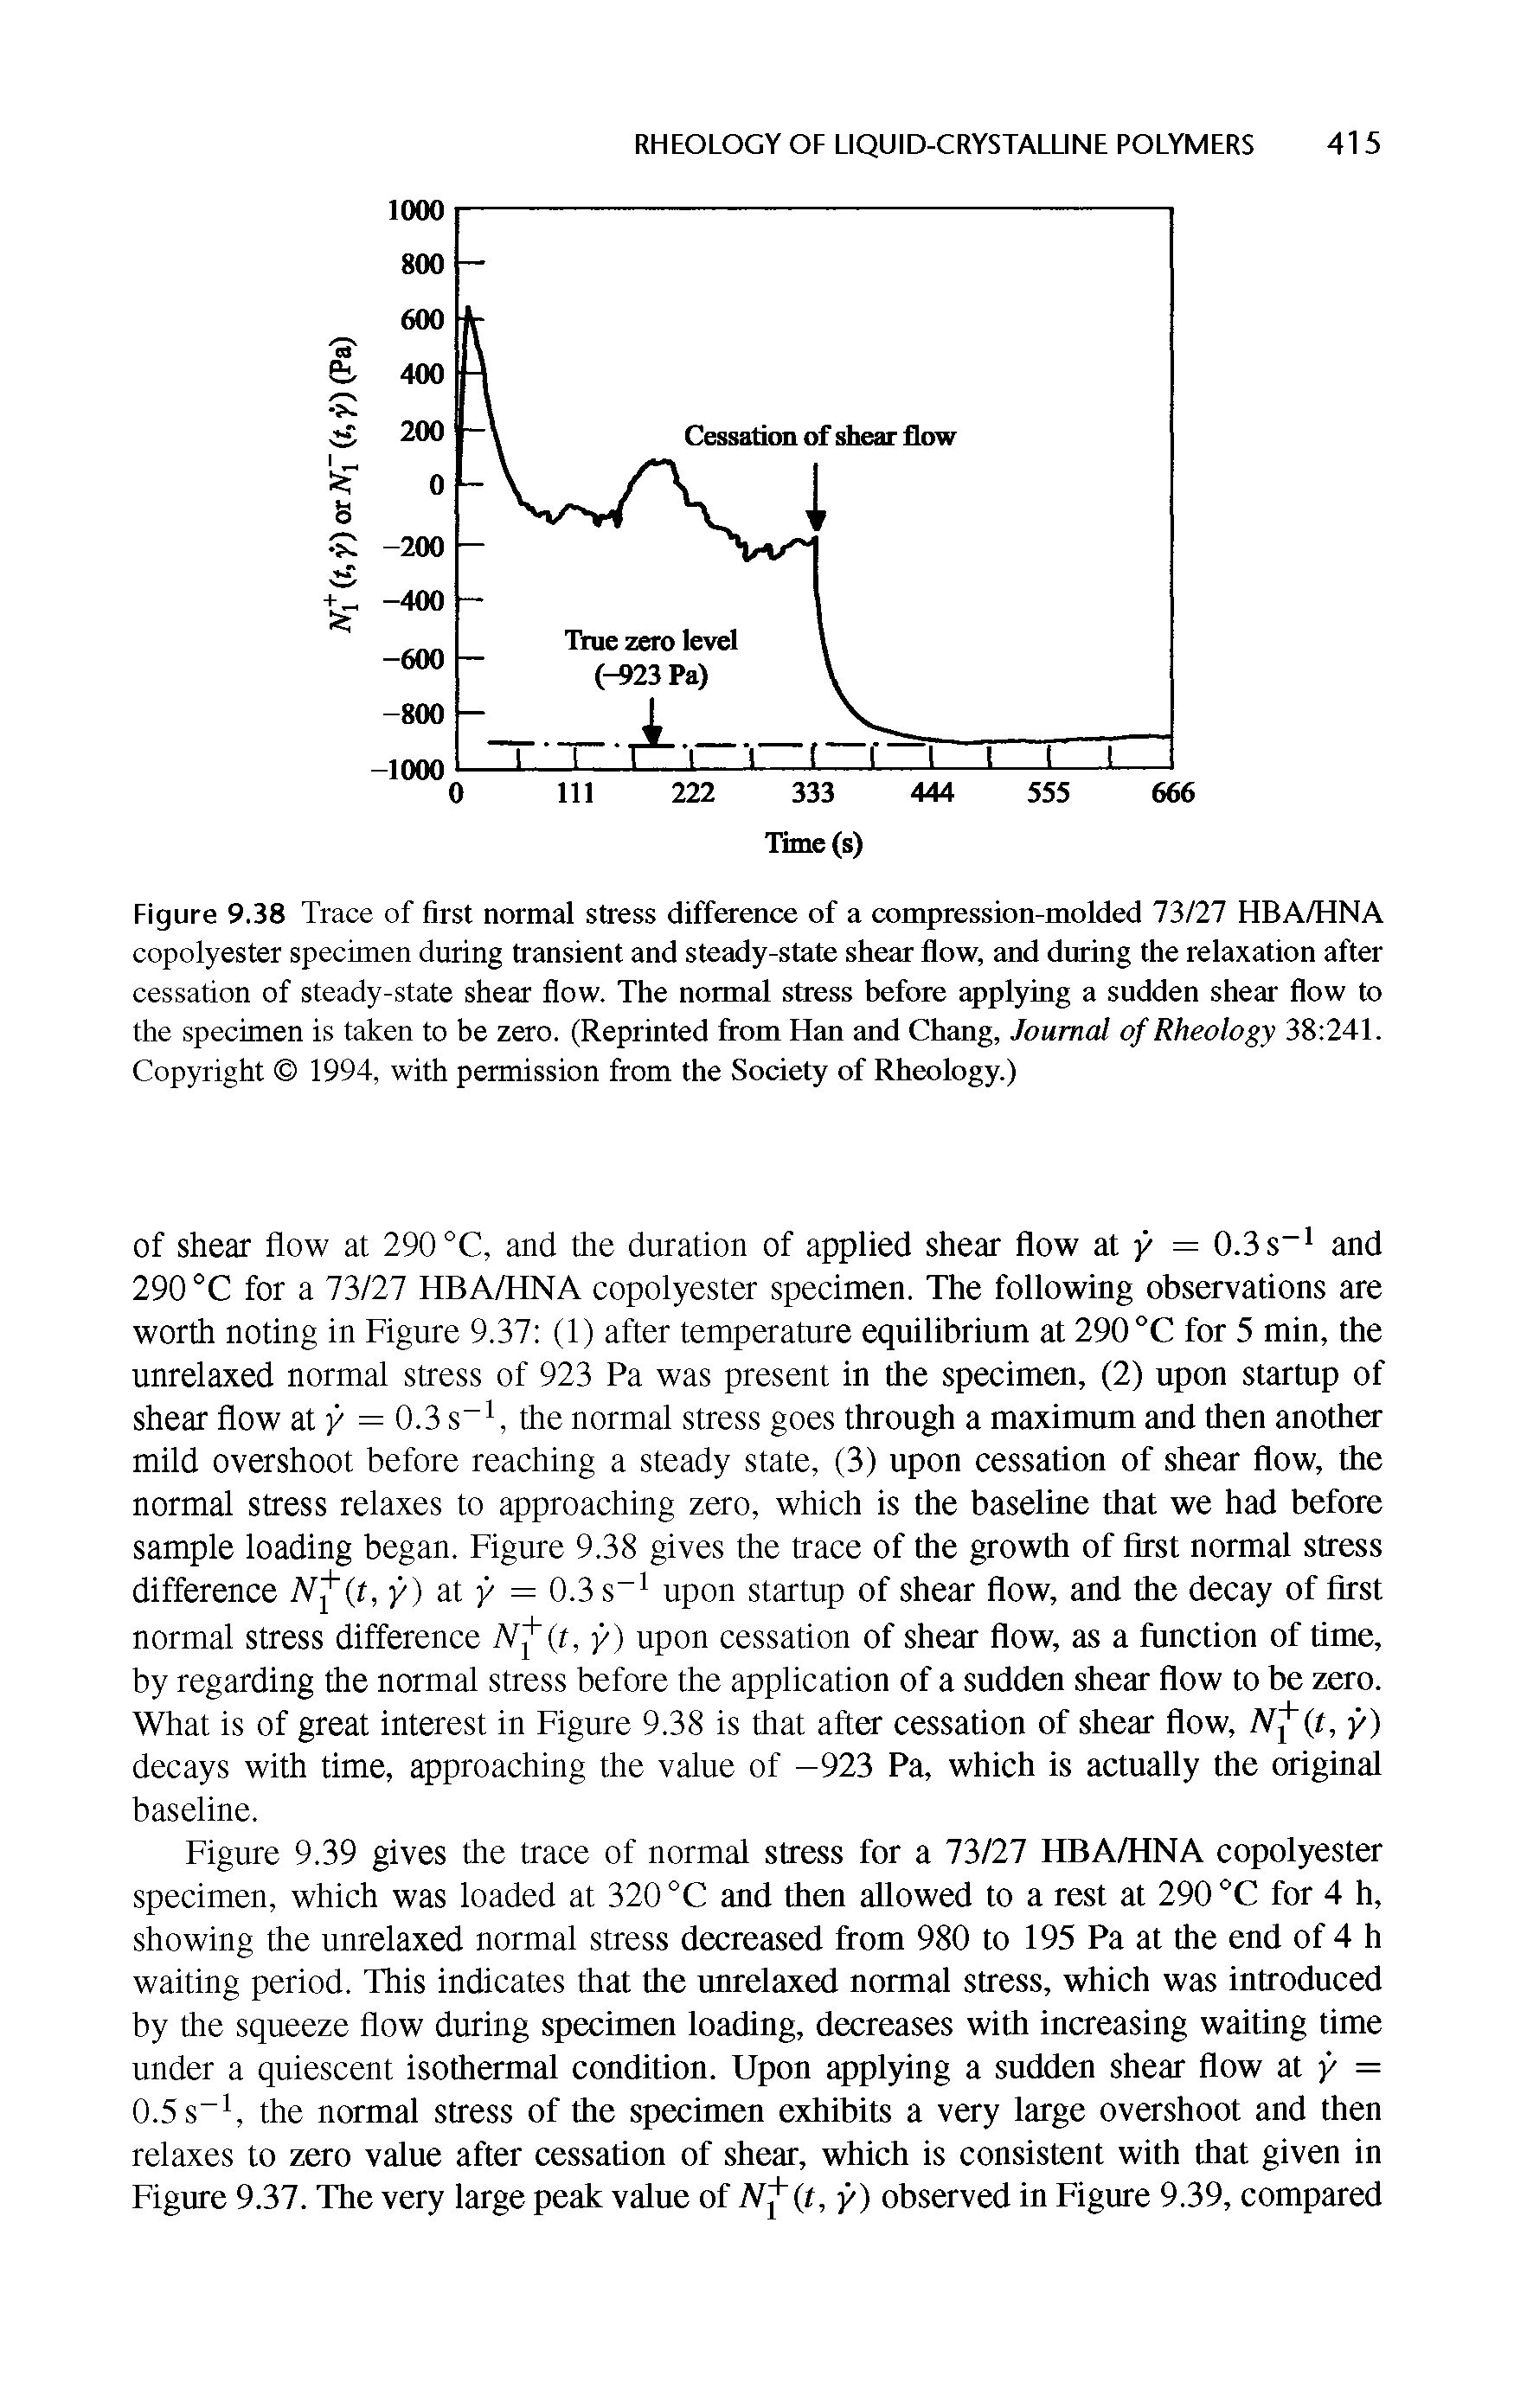 Figure 9.38 Trace of first normal stress difference of a compression-molded 73/27 HBA/HNA copolyester specimen during transient and steady-state shear flow, and dnring the relaxation after cessation of steady-state shear flow. The normal stress before applying a sudden shear flow to the specimen is taken to be zero. (Reprinted from Han and Chang, Journal of Rheology 38 241. Copyright 1994, with permission from the Society of Rheology.)...